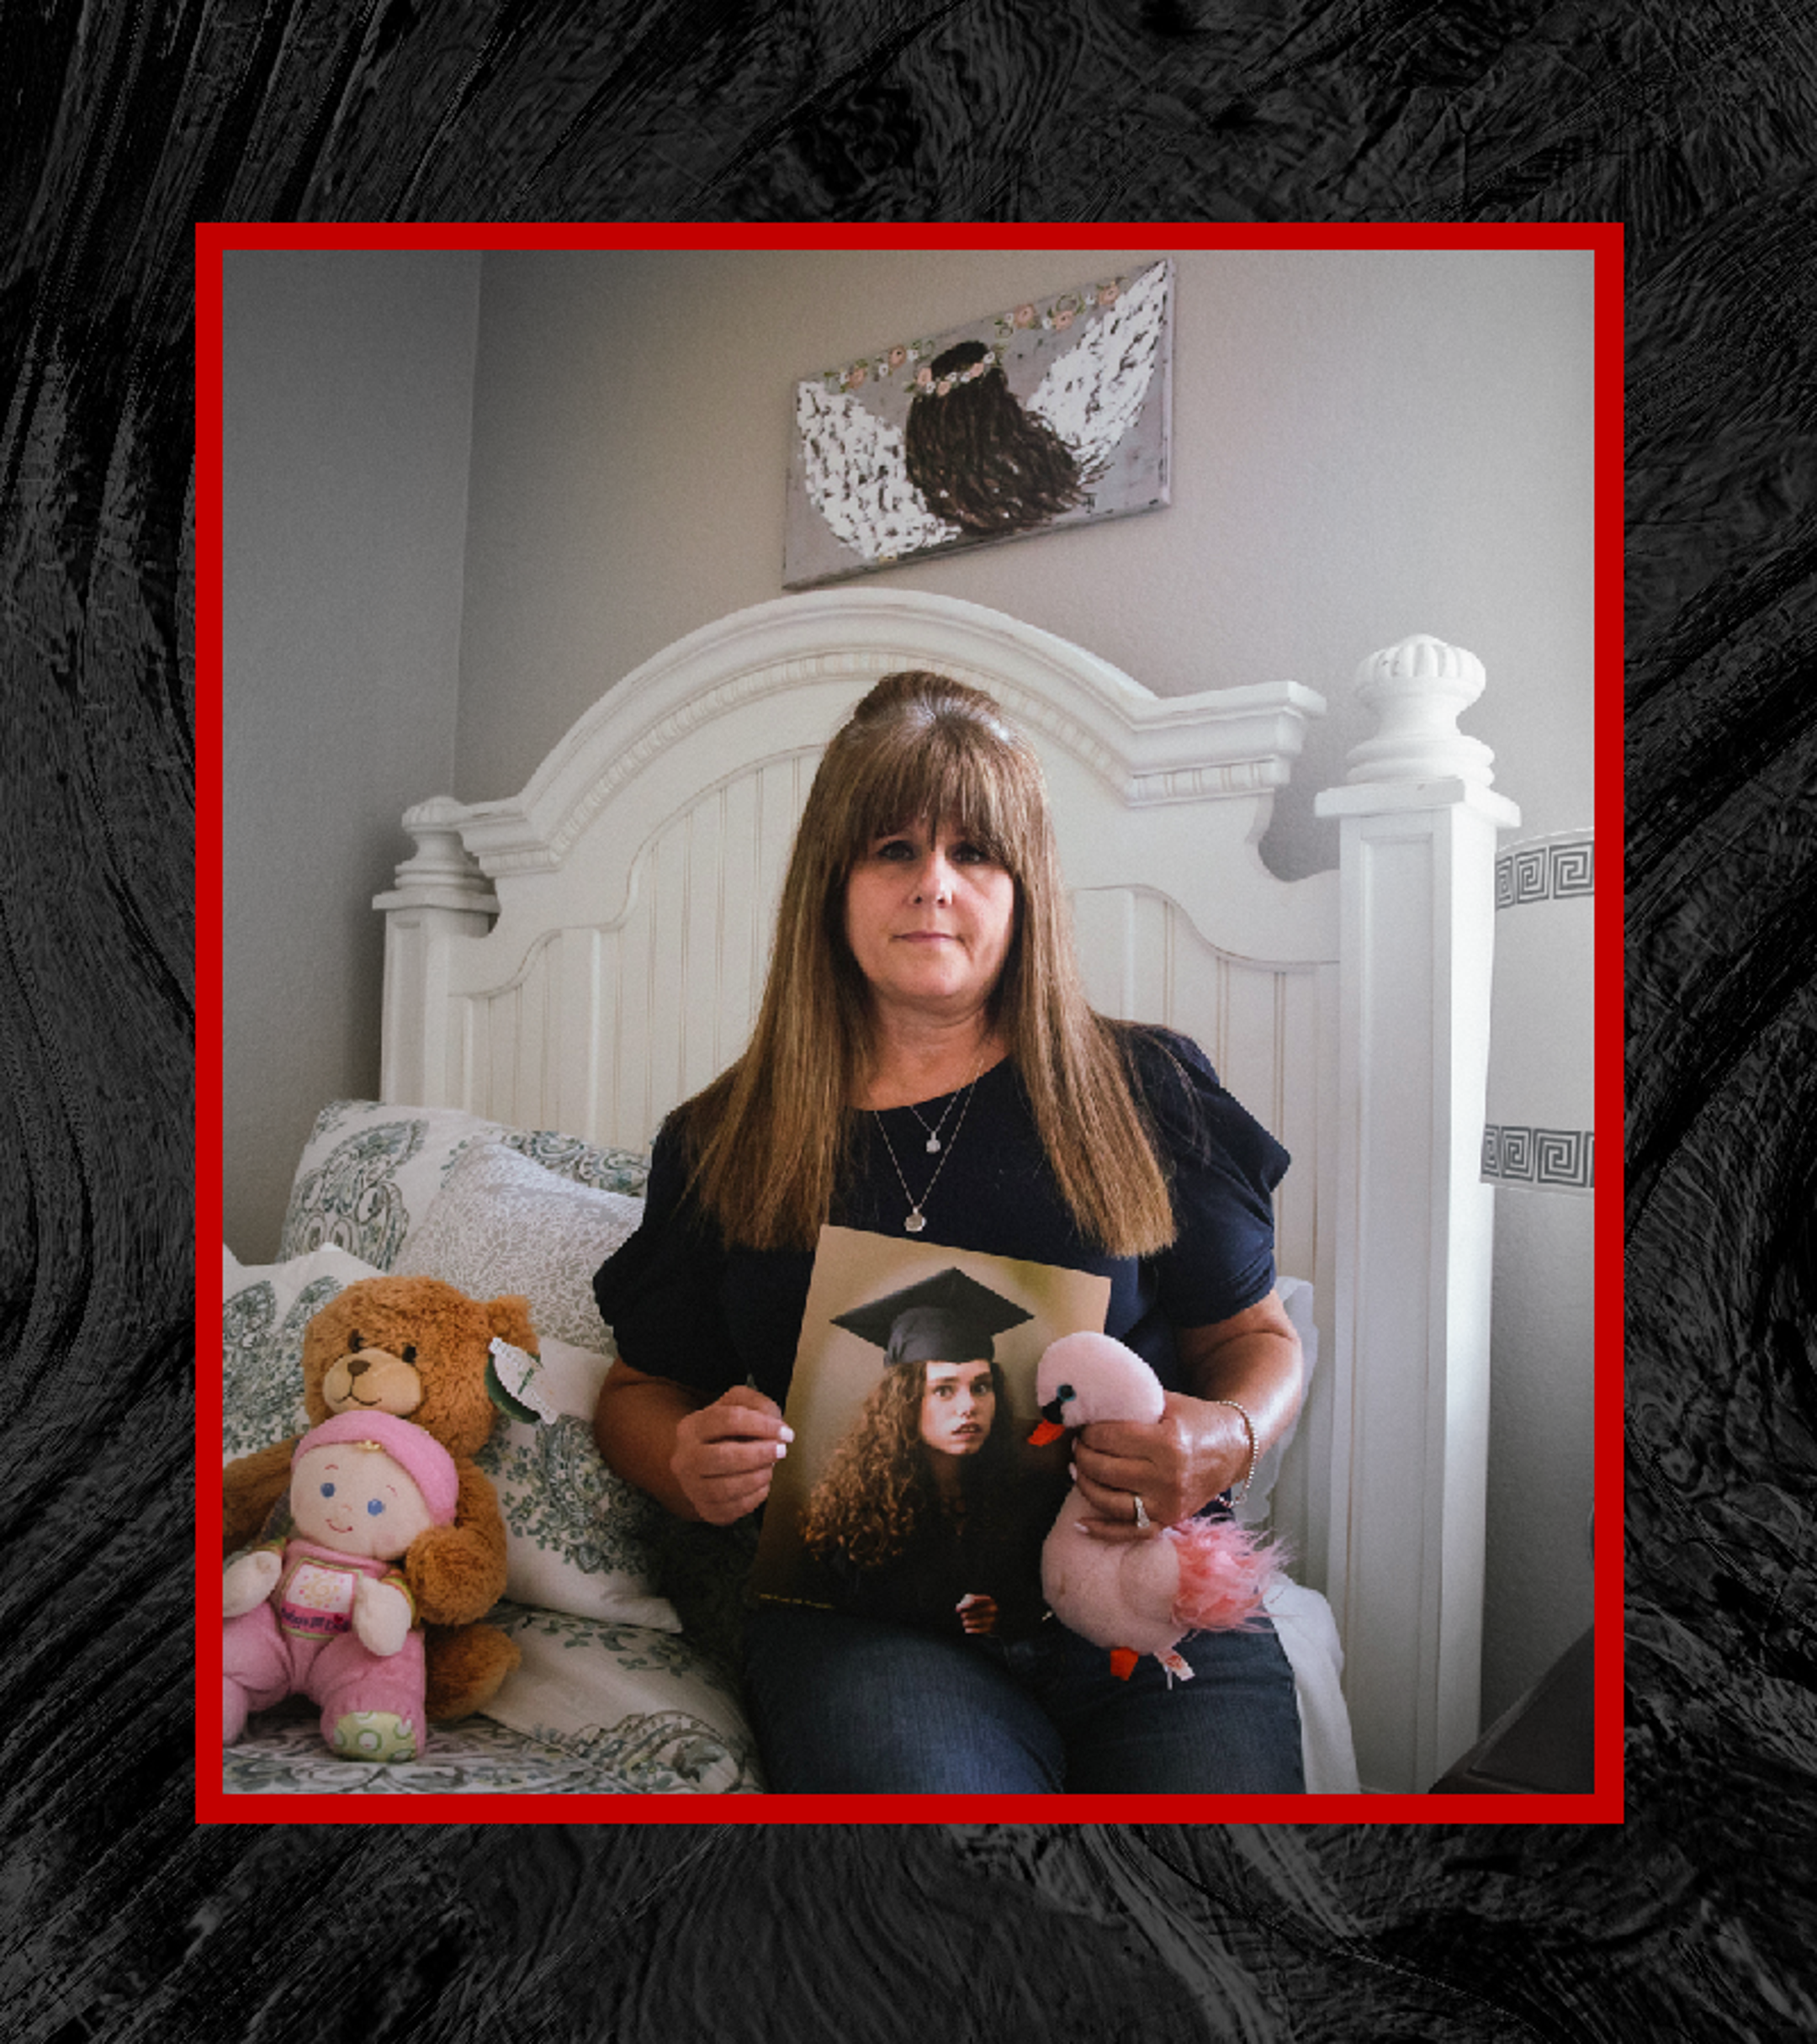 Joann Pierson poses sitting on a bed next to a handful of stuffed animals, holding a photo of her daughter, 36-year-old Kristi Norris, who died at a D&S Residential Services Group home in October 2020. The photo is desaturated except for the mother and her mementos. In the photo she holds, Kristi is sporting her grad cap and robes. A border of dark water surrounds the photograph.